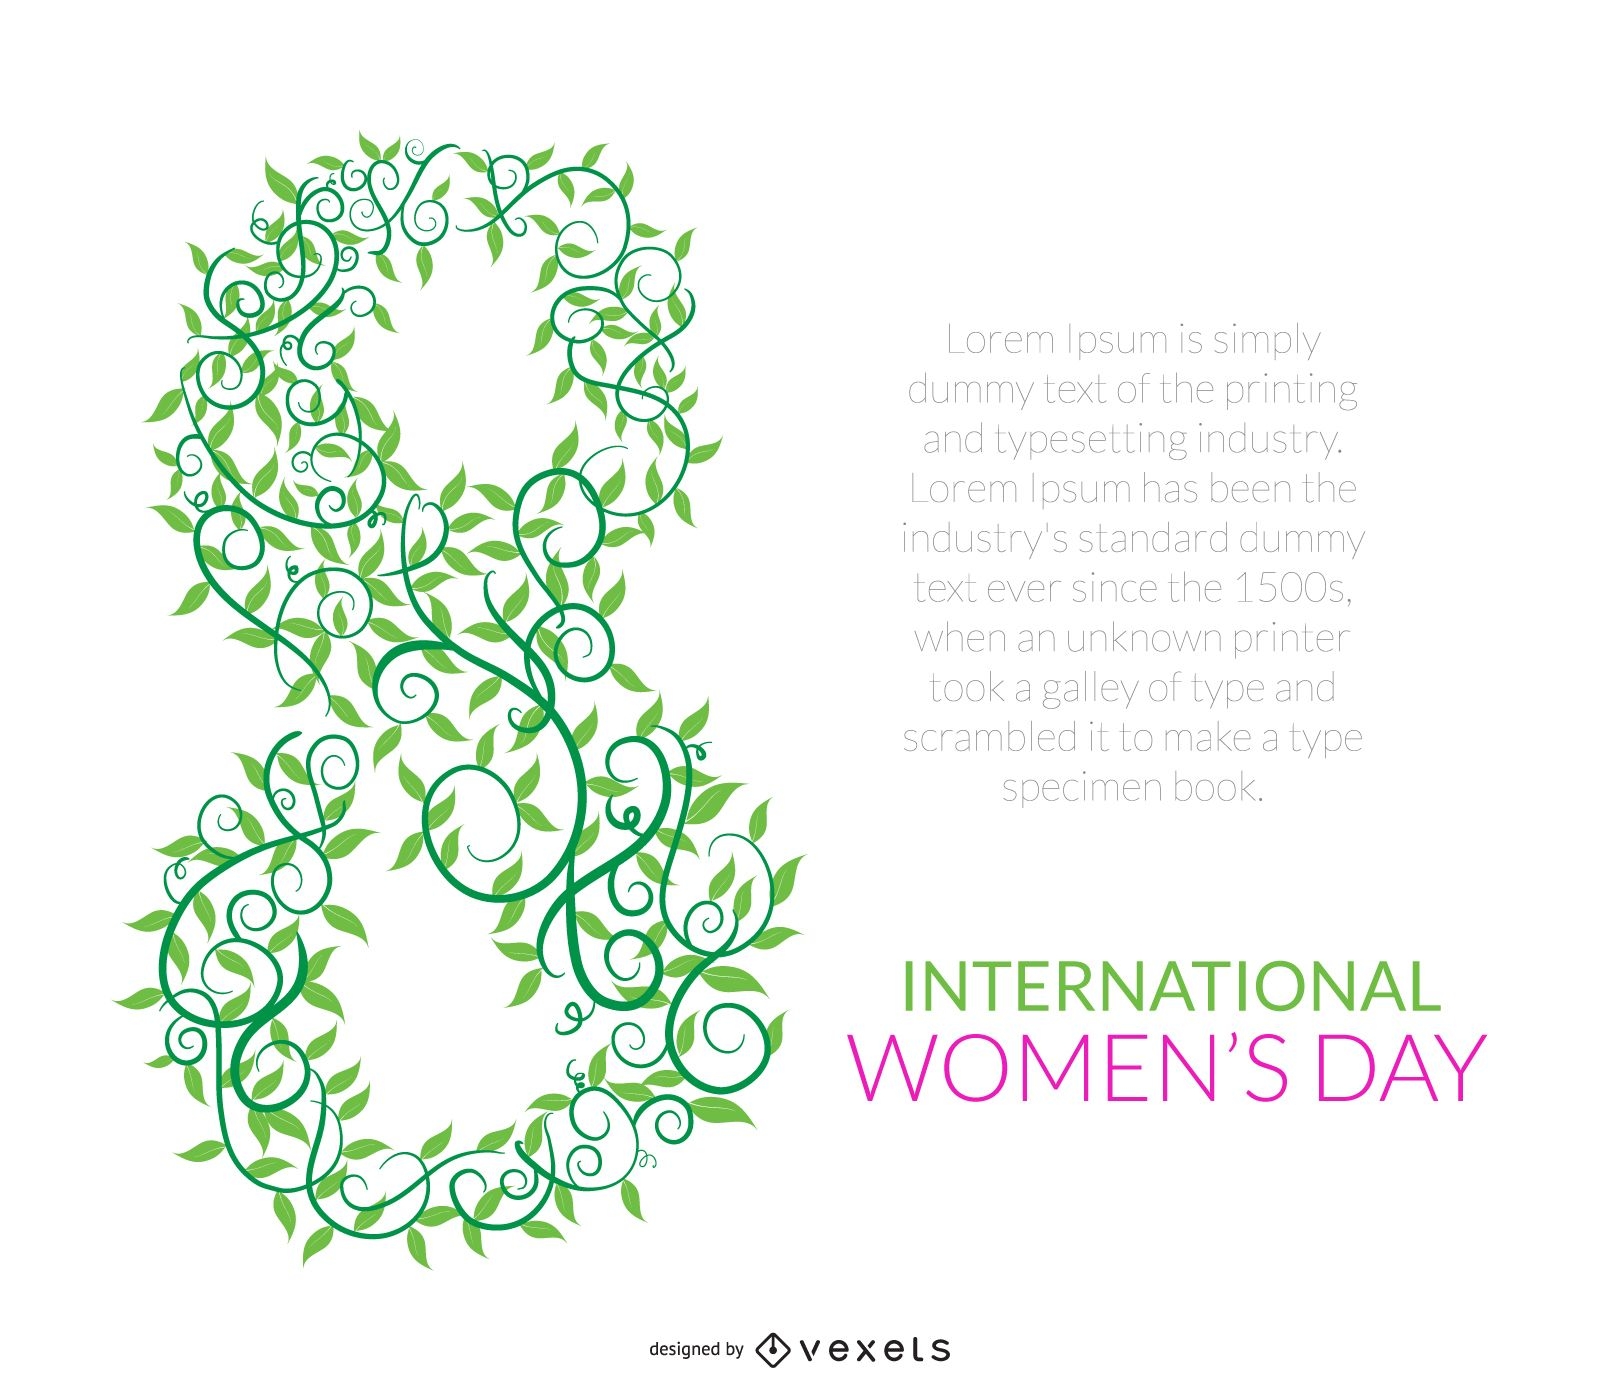 Women's Day nature flyer